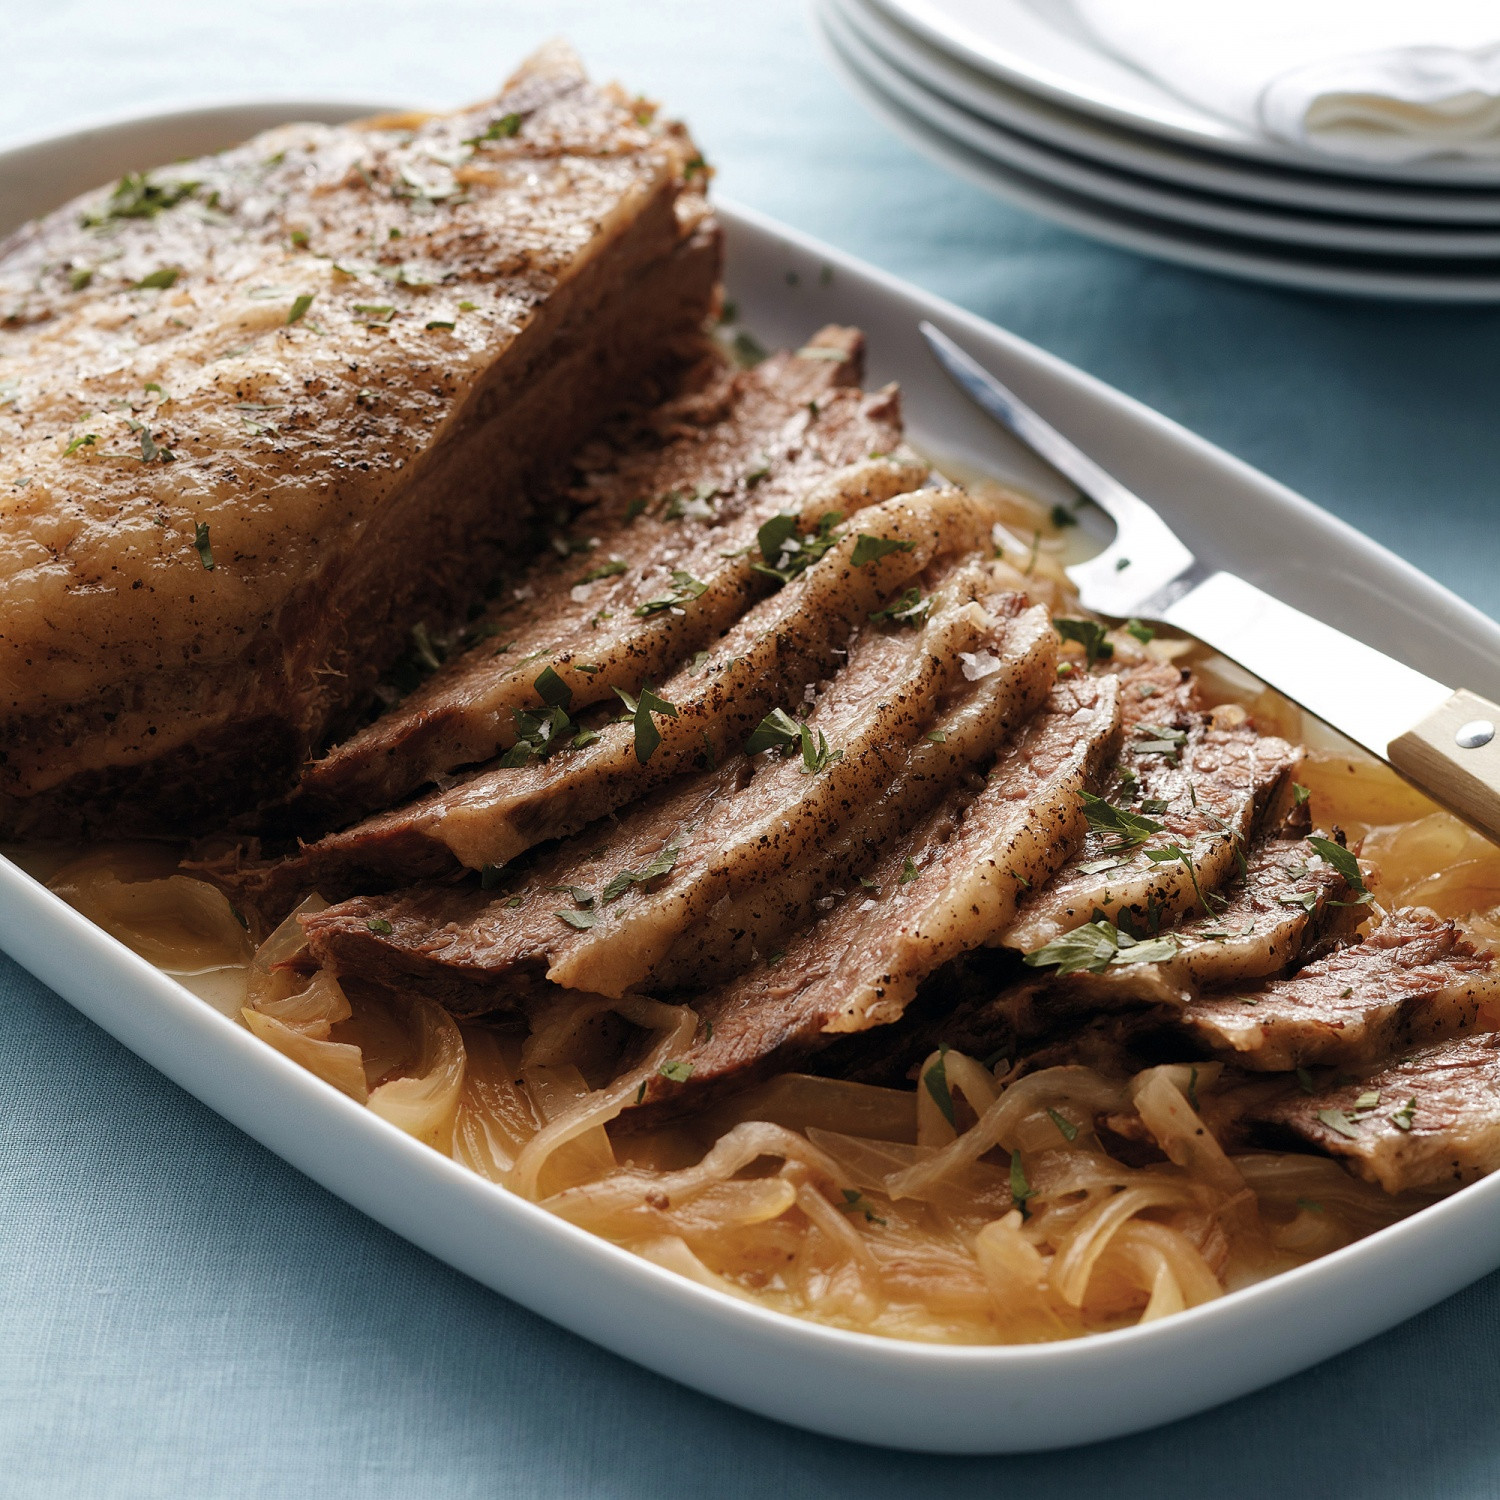 Passover Brisket Recipe Slow Cooker
 Slow Cooker Brisket and ions Recipe